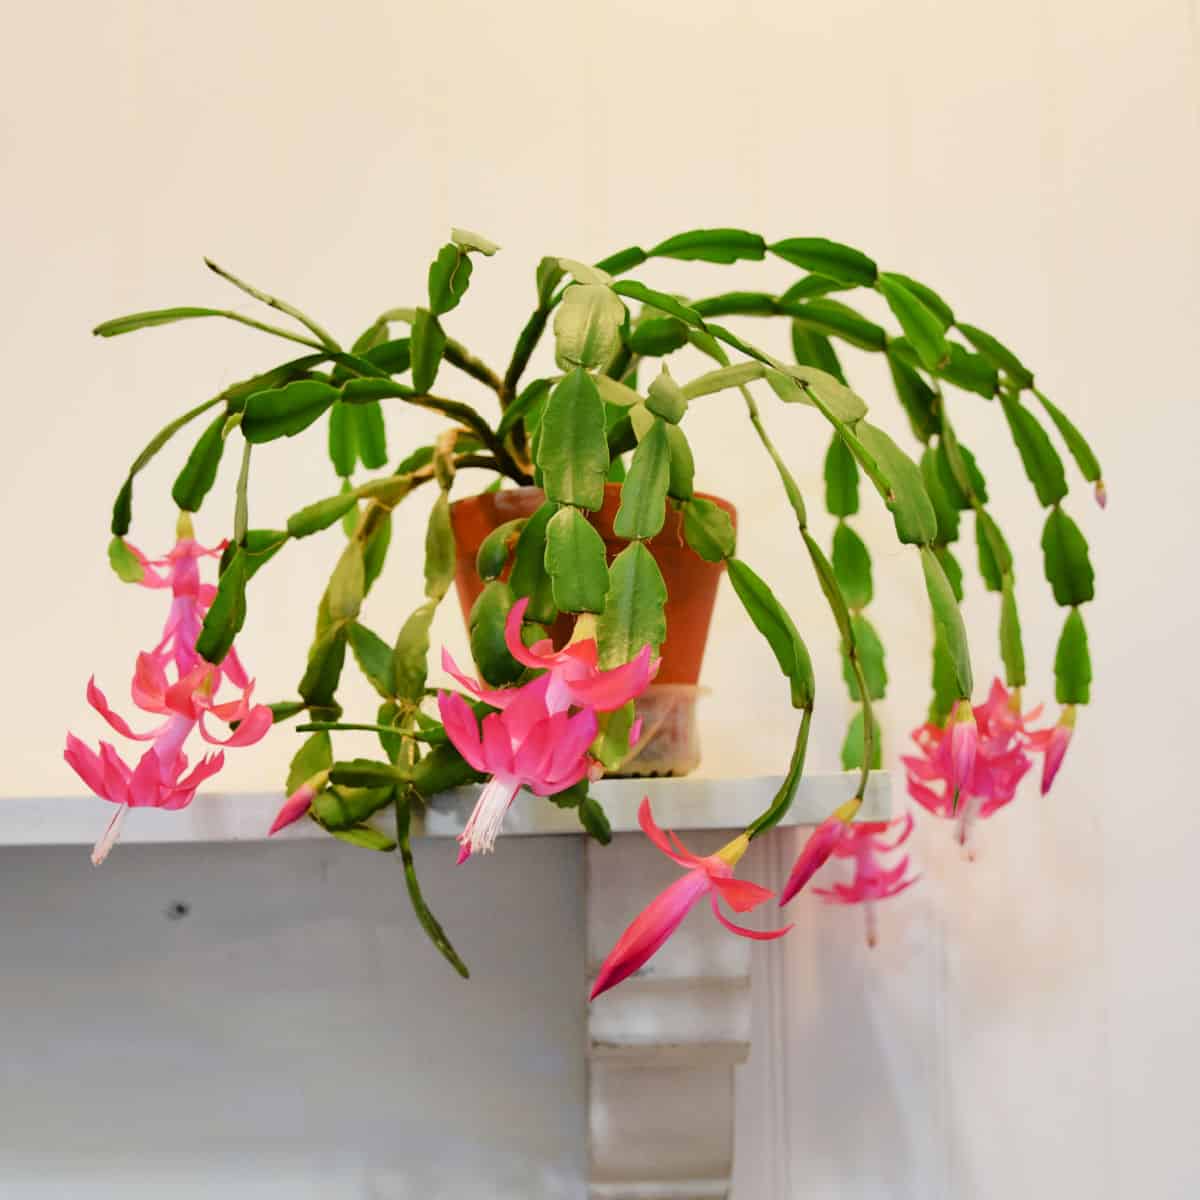 Christmas Cactus Propagation faster and easier!